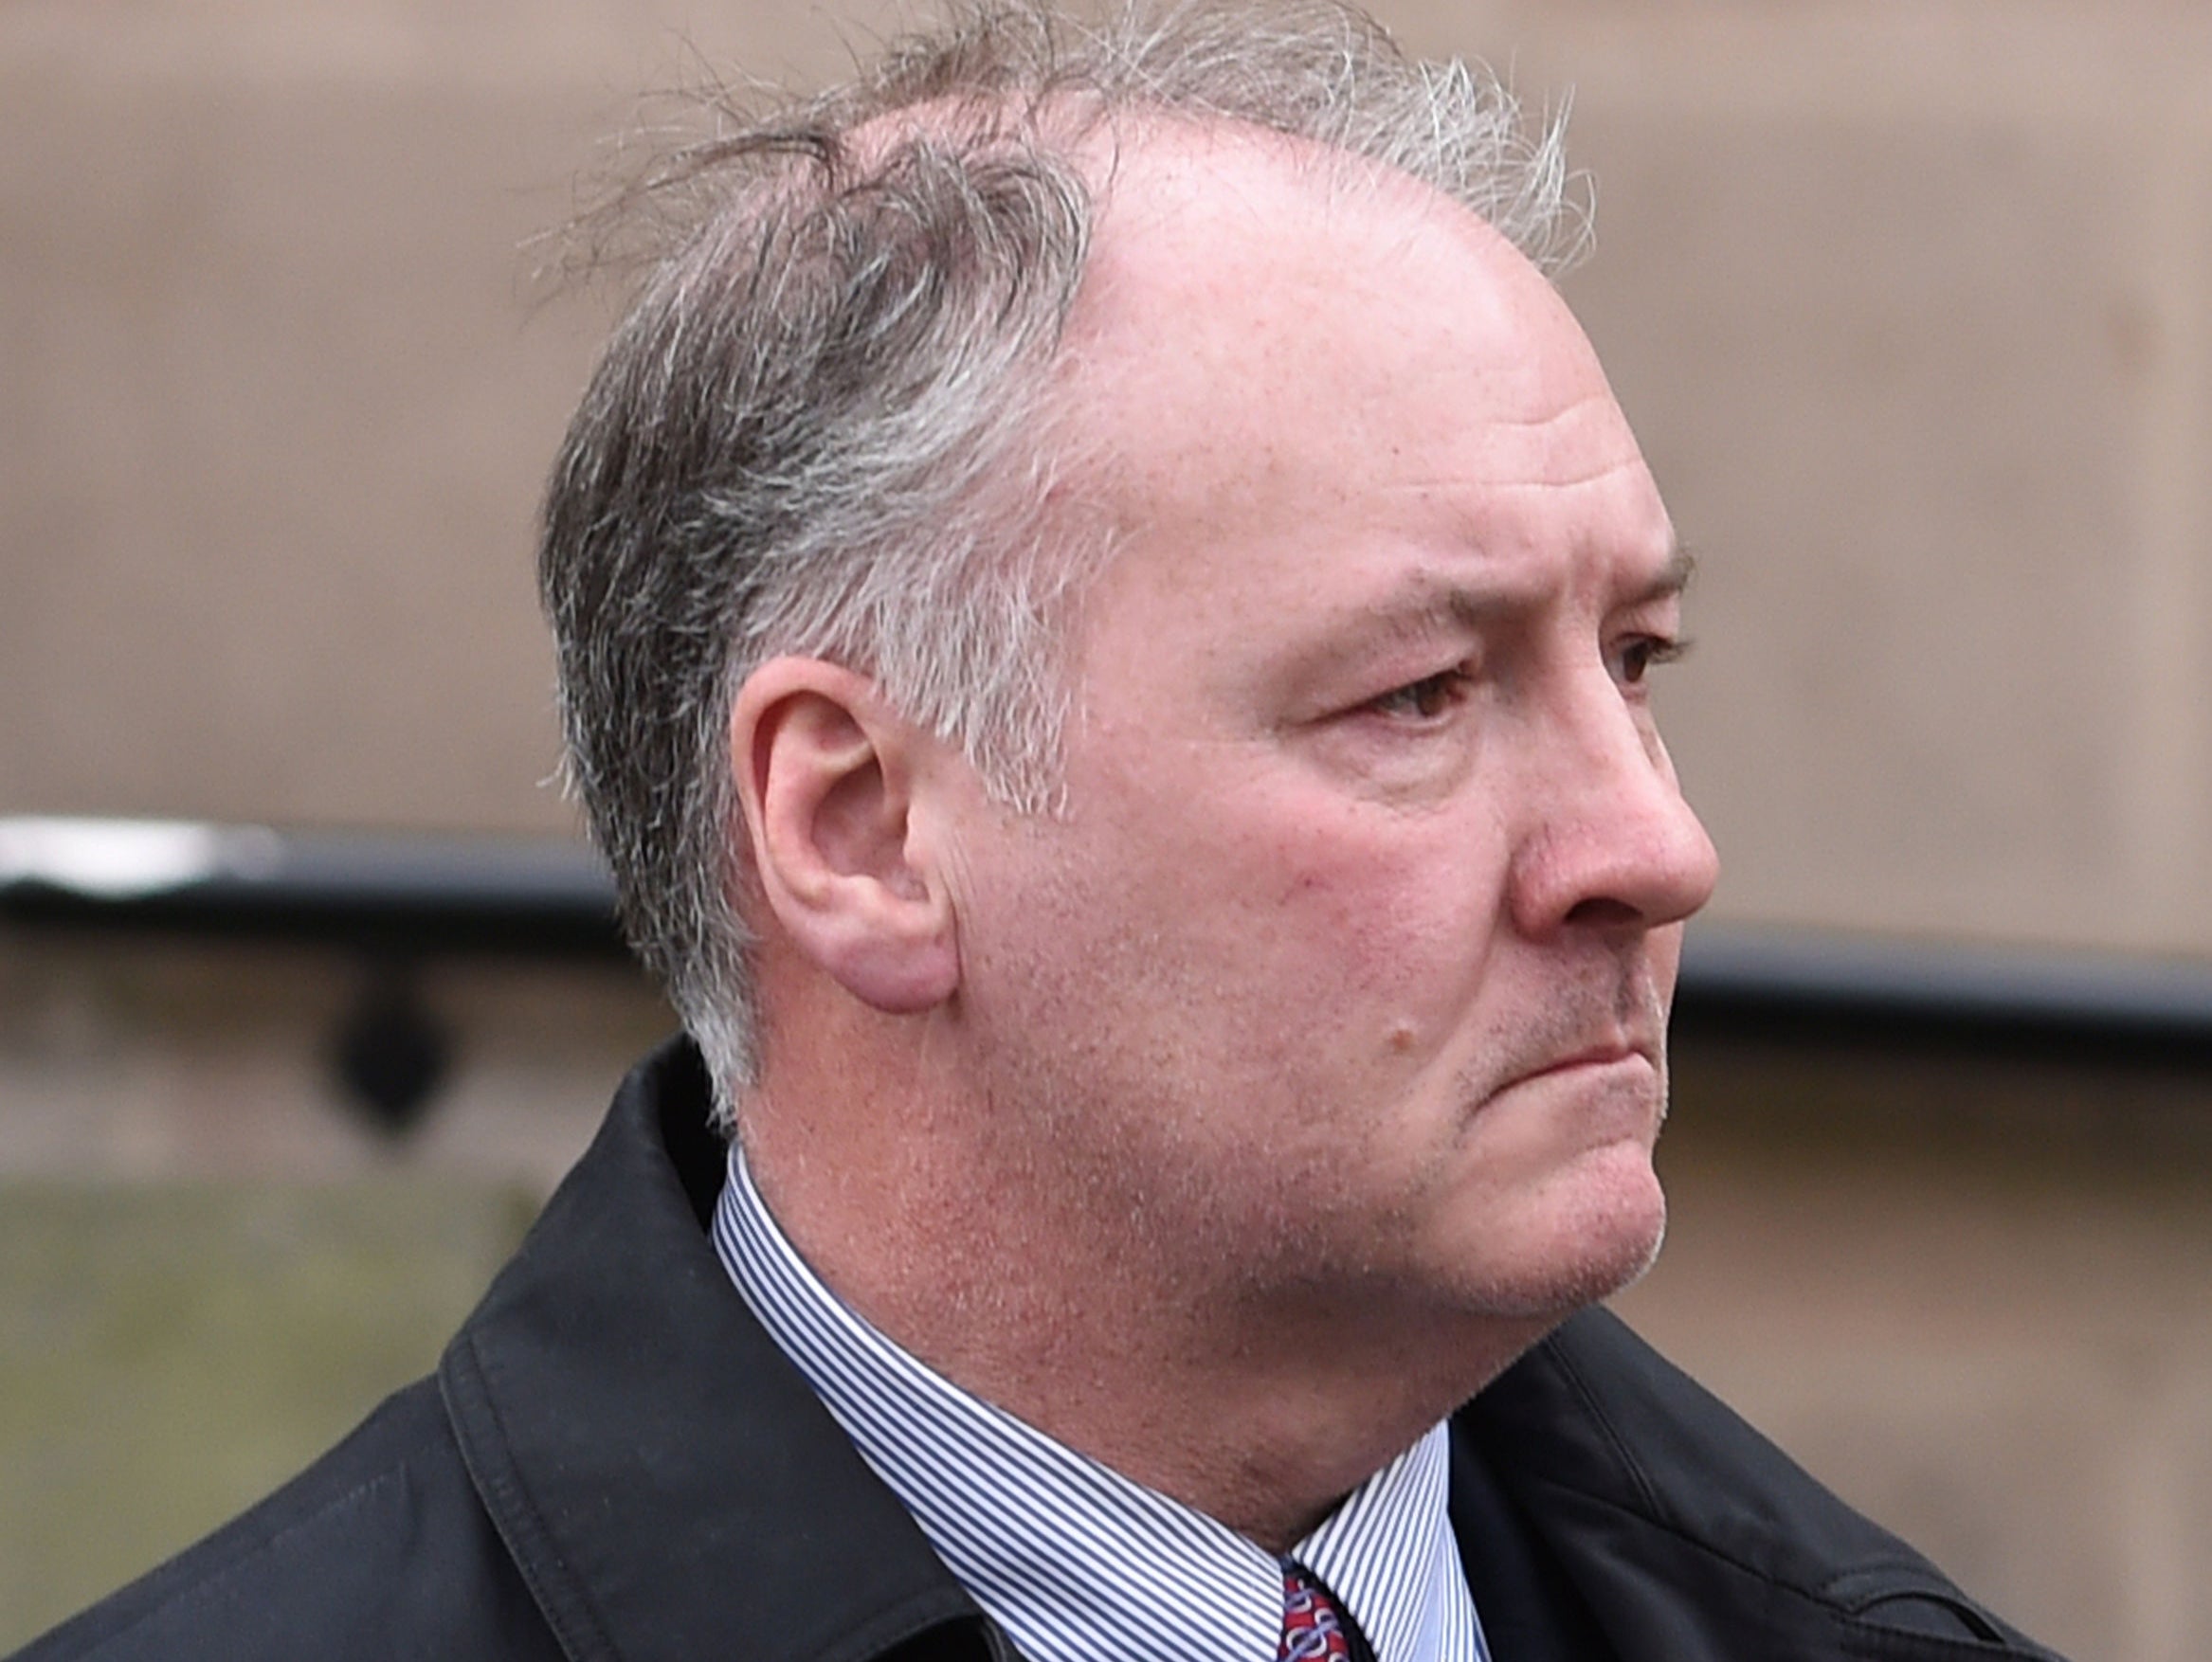 Surgeon Ian Paterson was jailed for carrying out unnecessary surgery on women